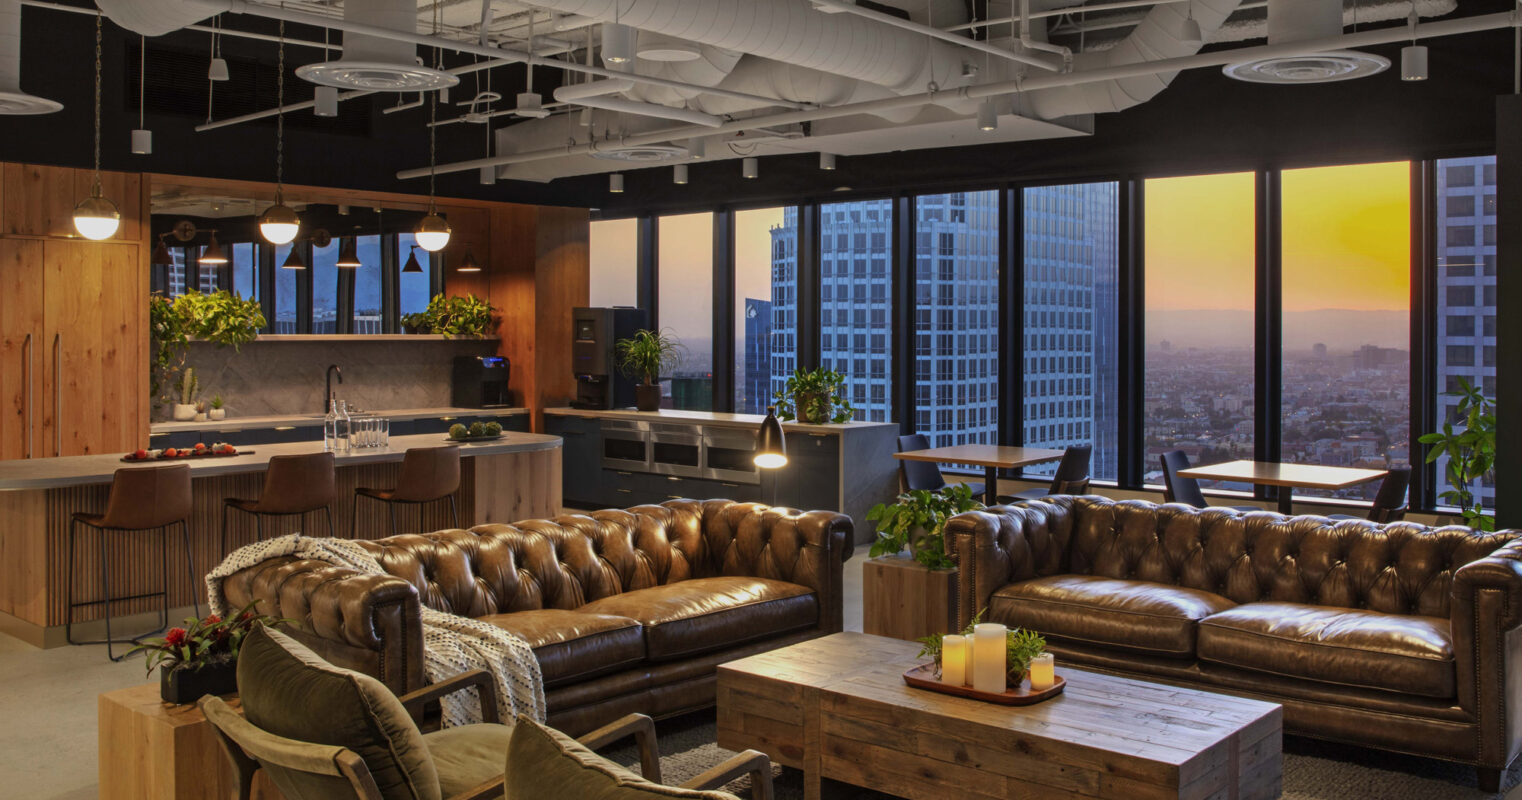 Modern urban loft featuring exposed ceiling ducts and concrete beams, with a central tufted leather Chesterfield sofa, complemented by vintage wooden armchairs and industrial-style lighting. Floor-to-ceiling windows offer a panoramic city skyline view at dusk.